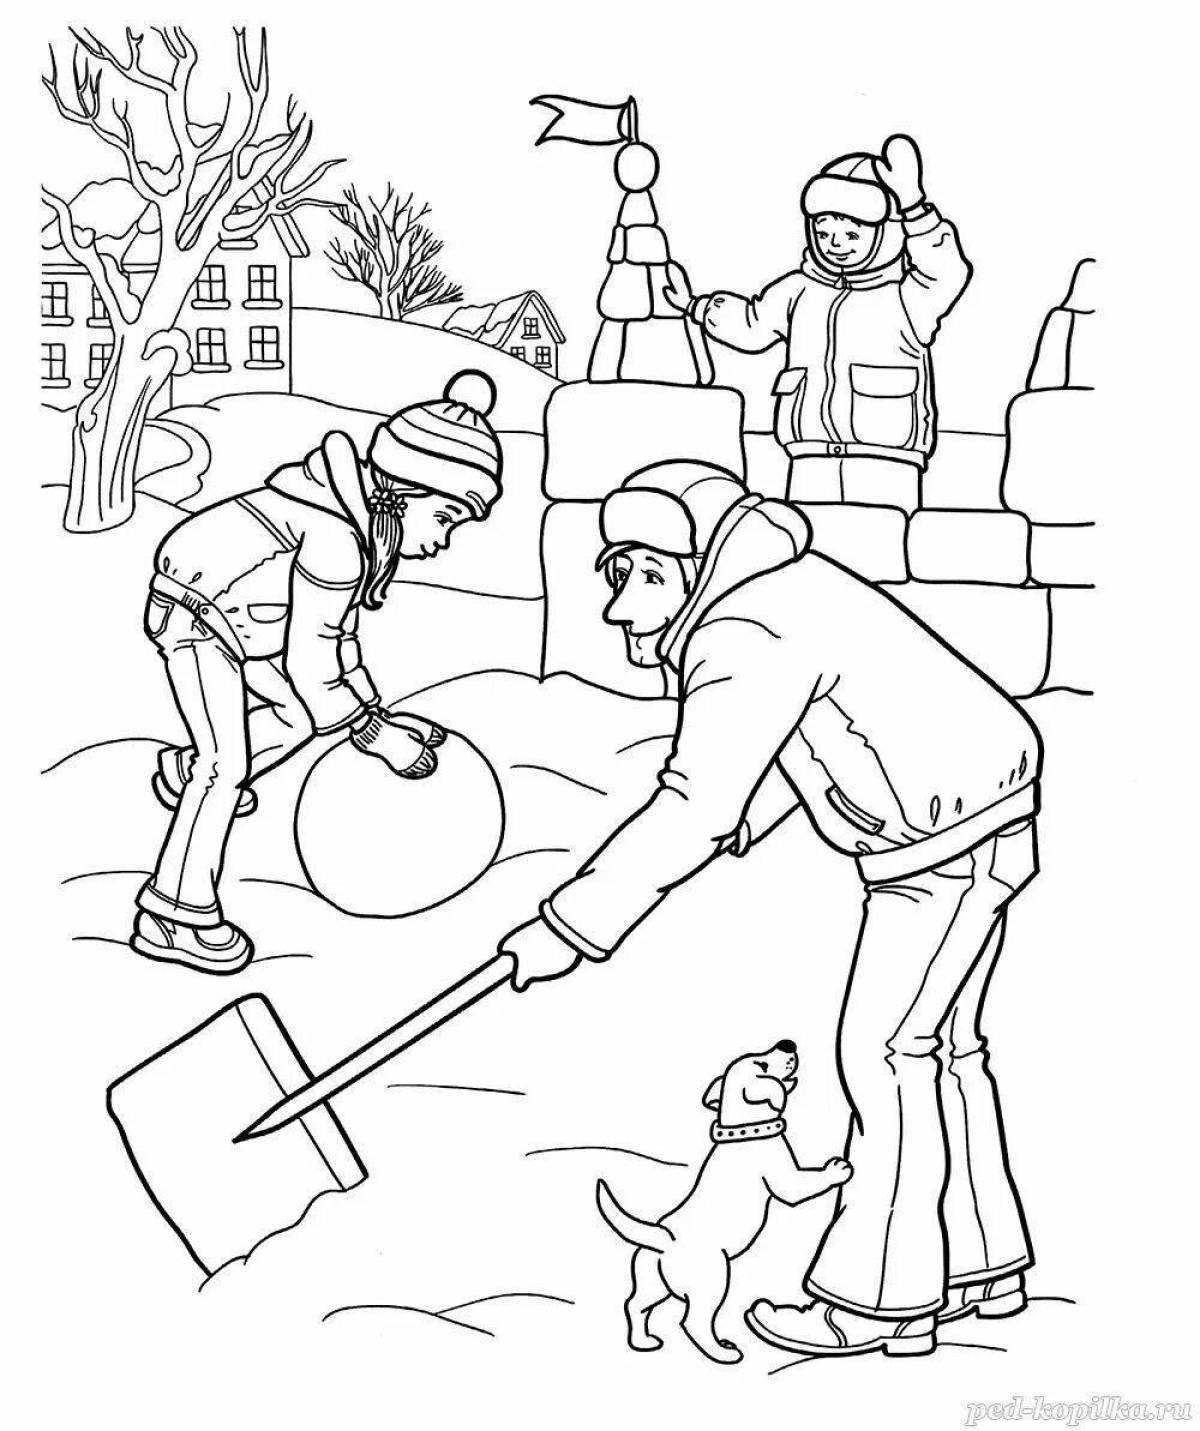 Radiantly coloring page of farm works in winter